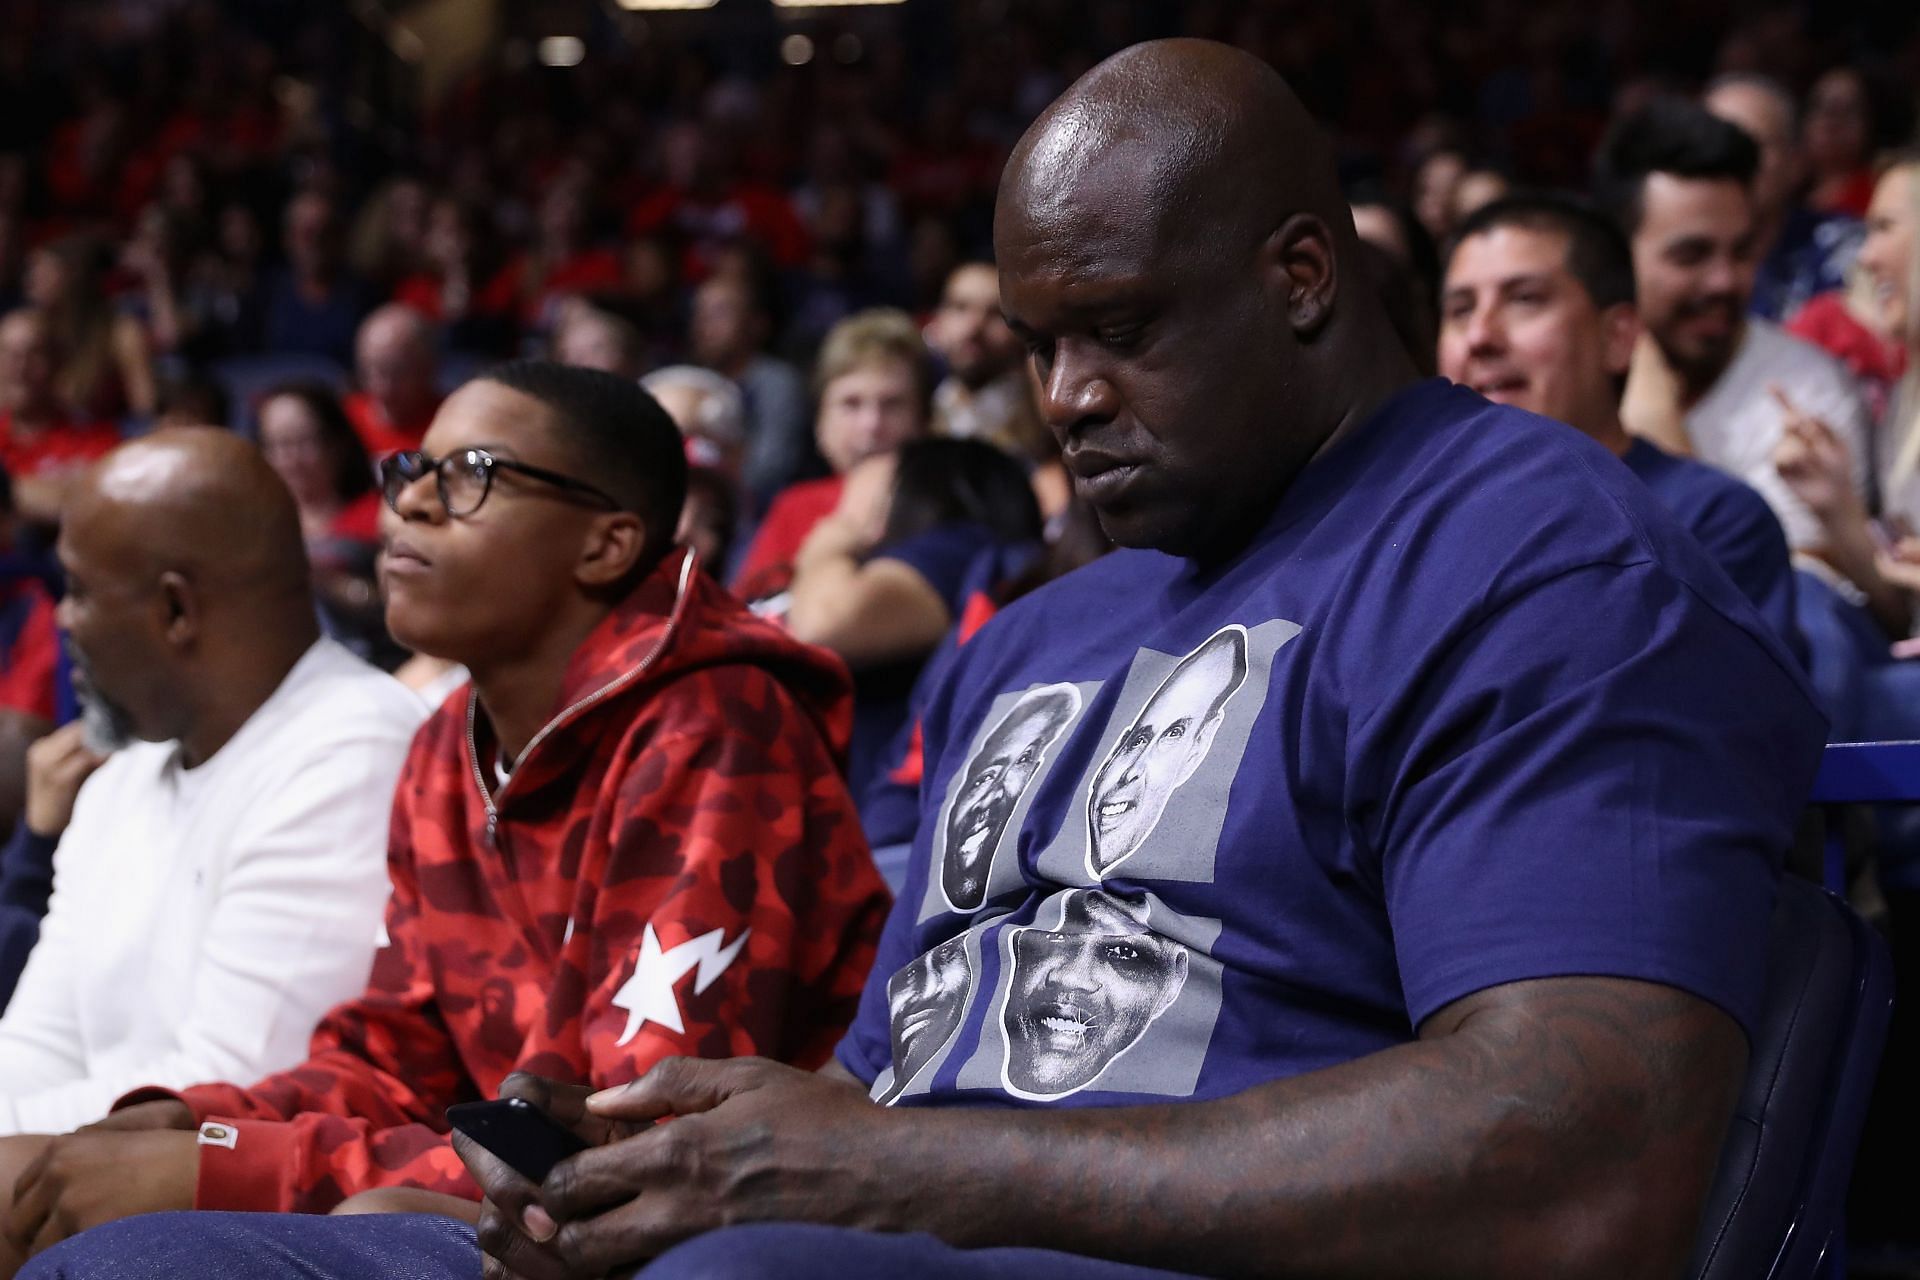 Shaq says his son Shareef could be the next Giannis Antetokounmpo.